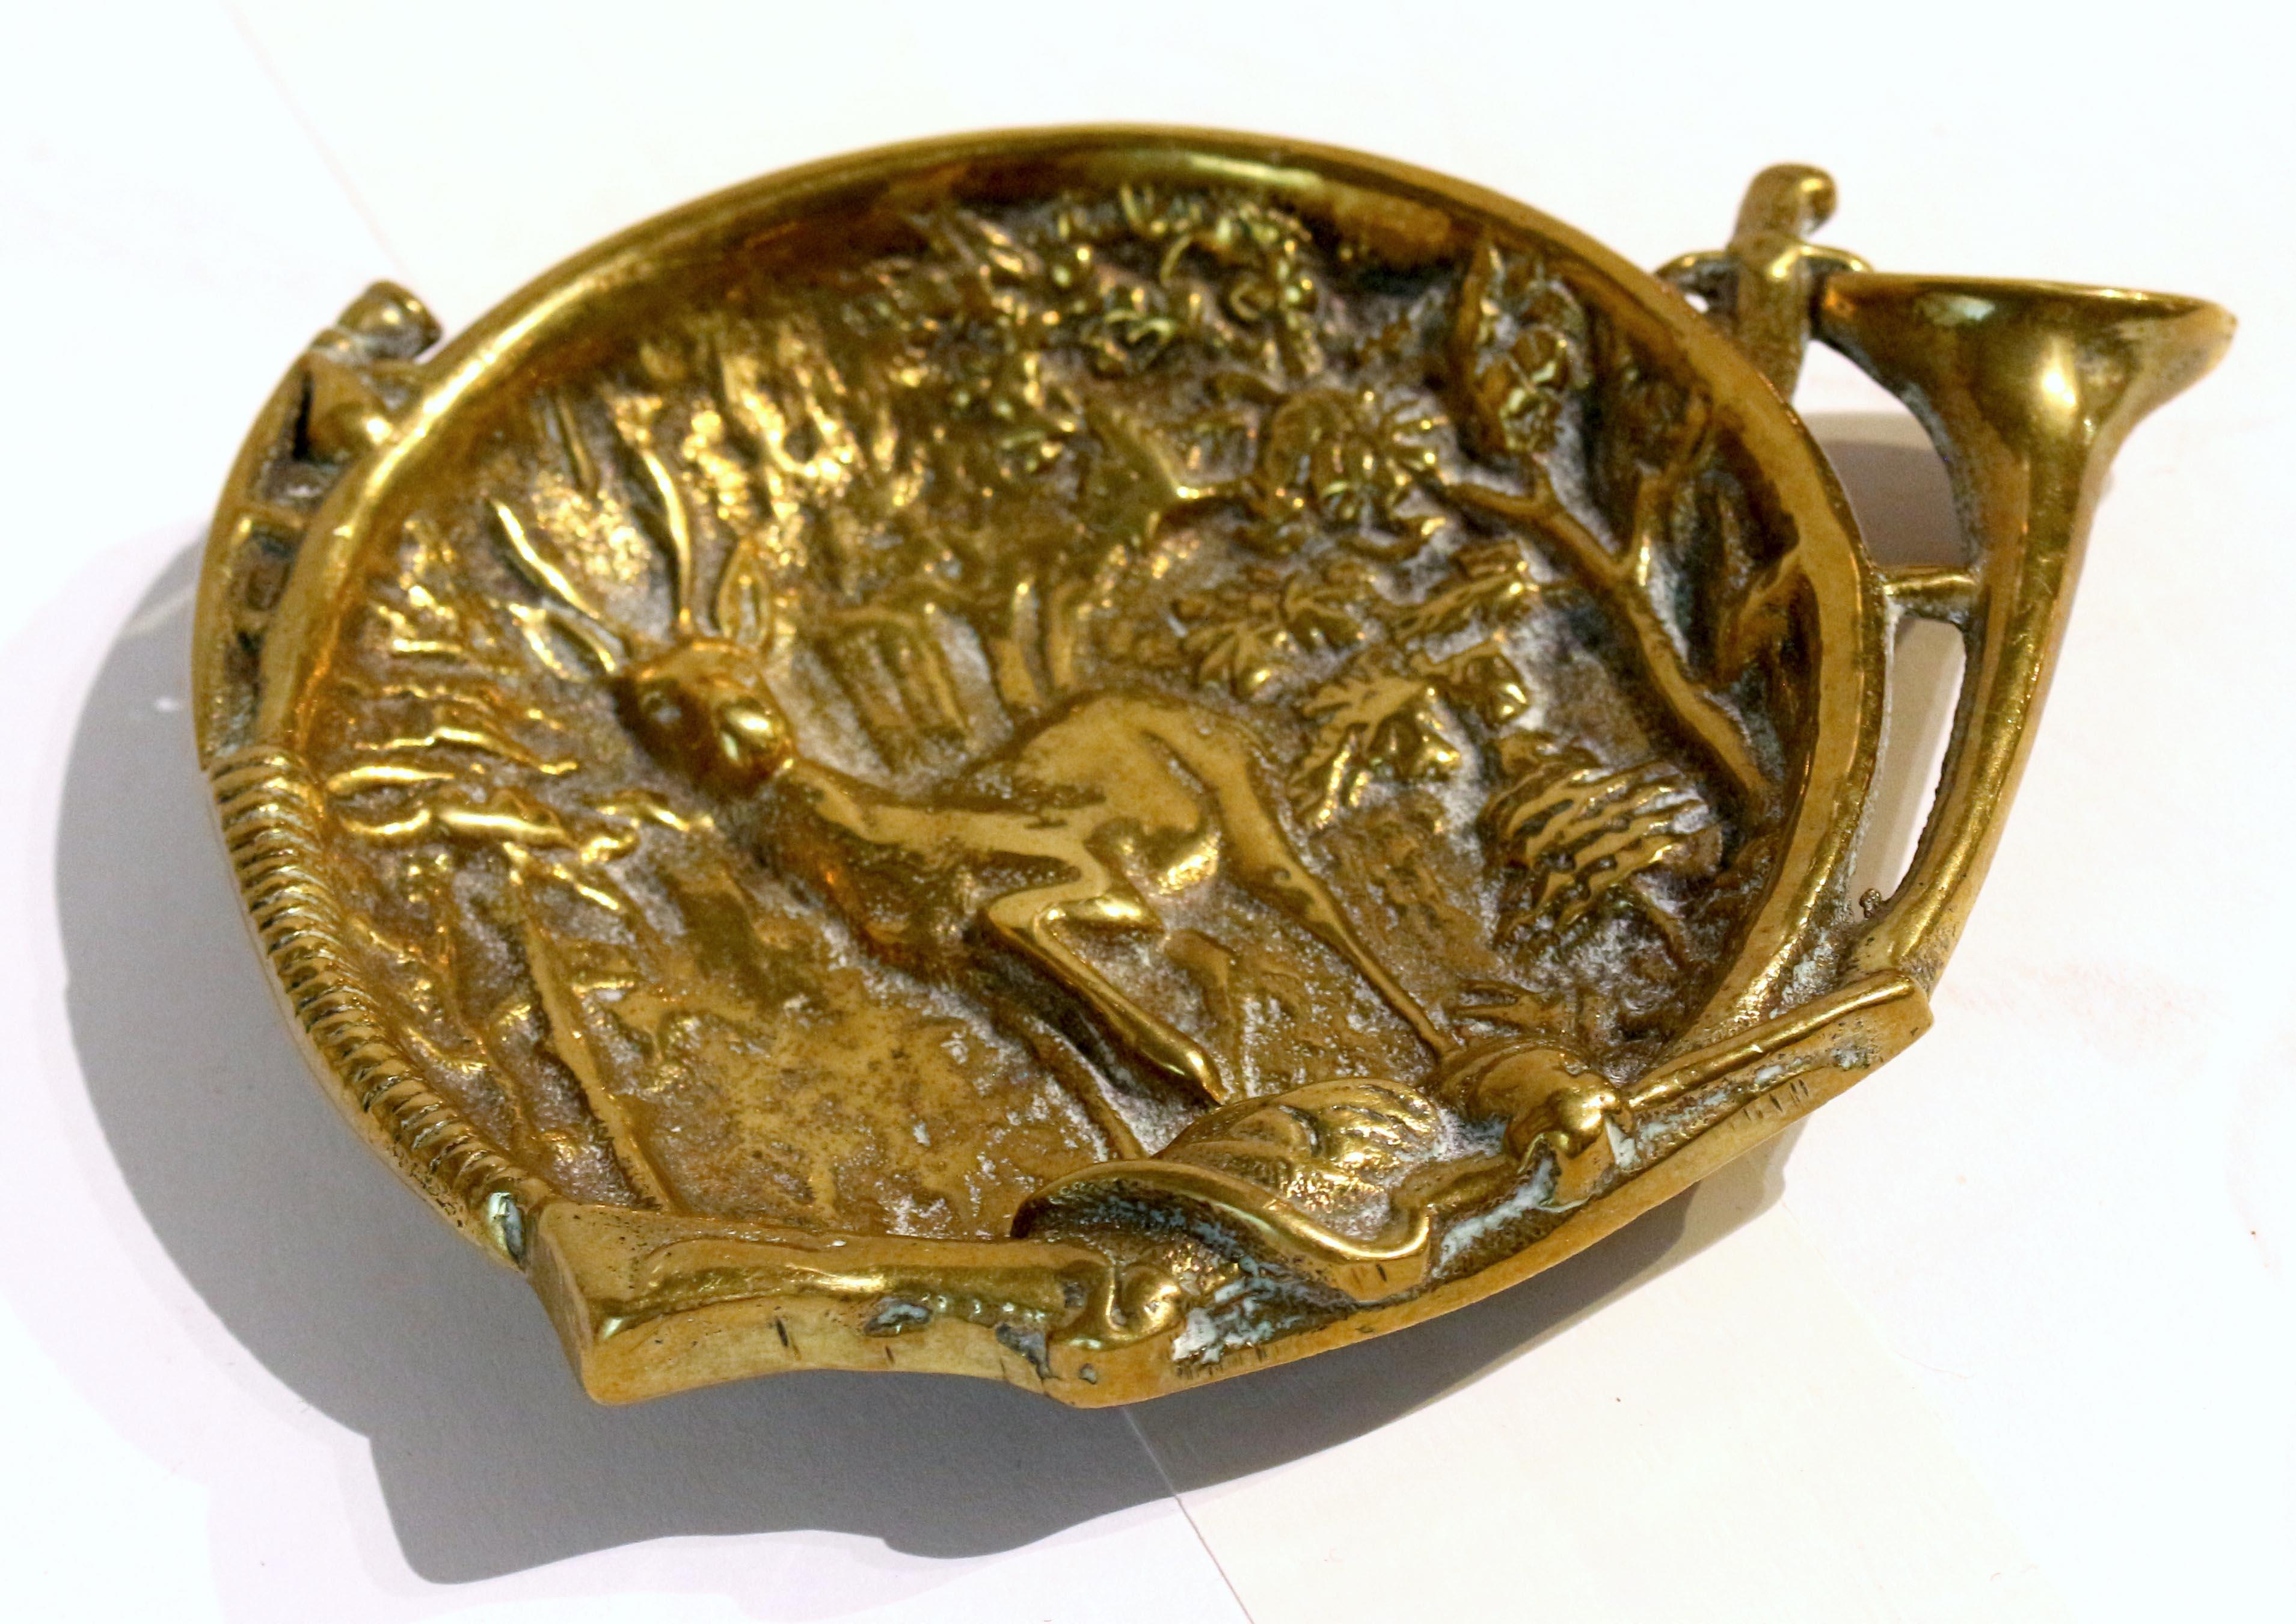 Early-mid 20th century brass trinket dish, English. Well cast motif with a stag in the wood and hunting horn surround.
6 1/8